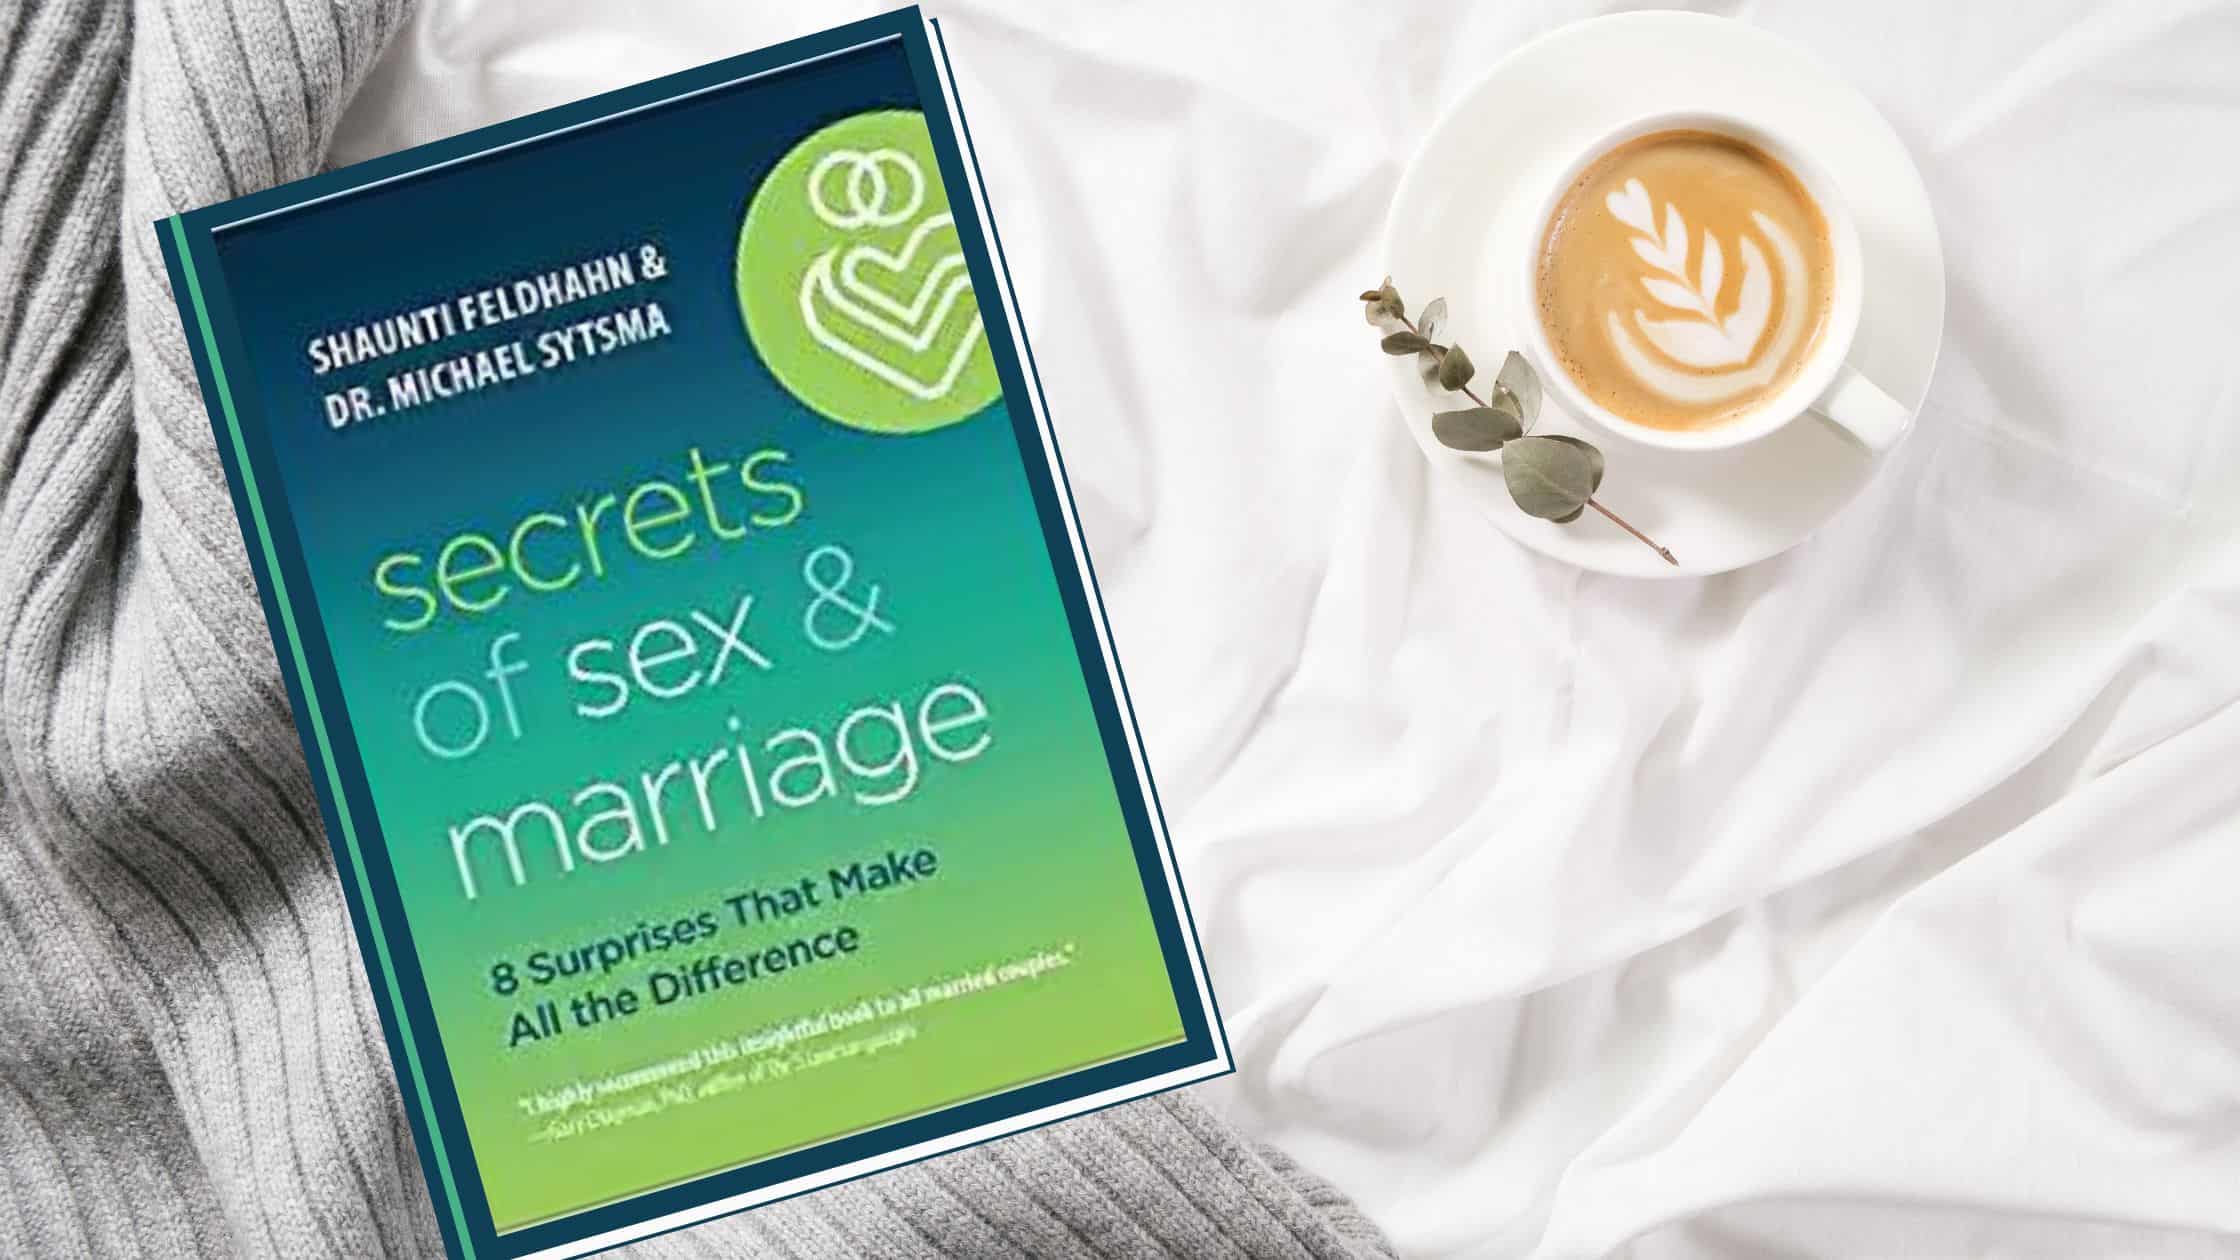 Book Review: Secrets of Sex and Marriage by Shaunti Feldhahn and Dr. Michael Sytsma